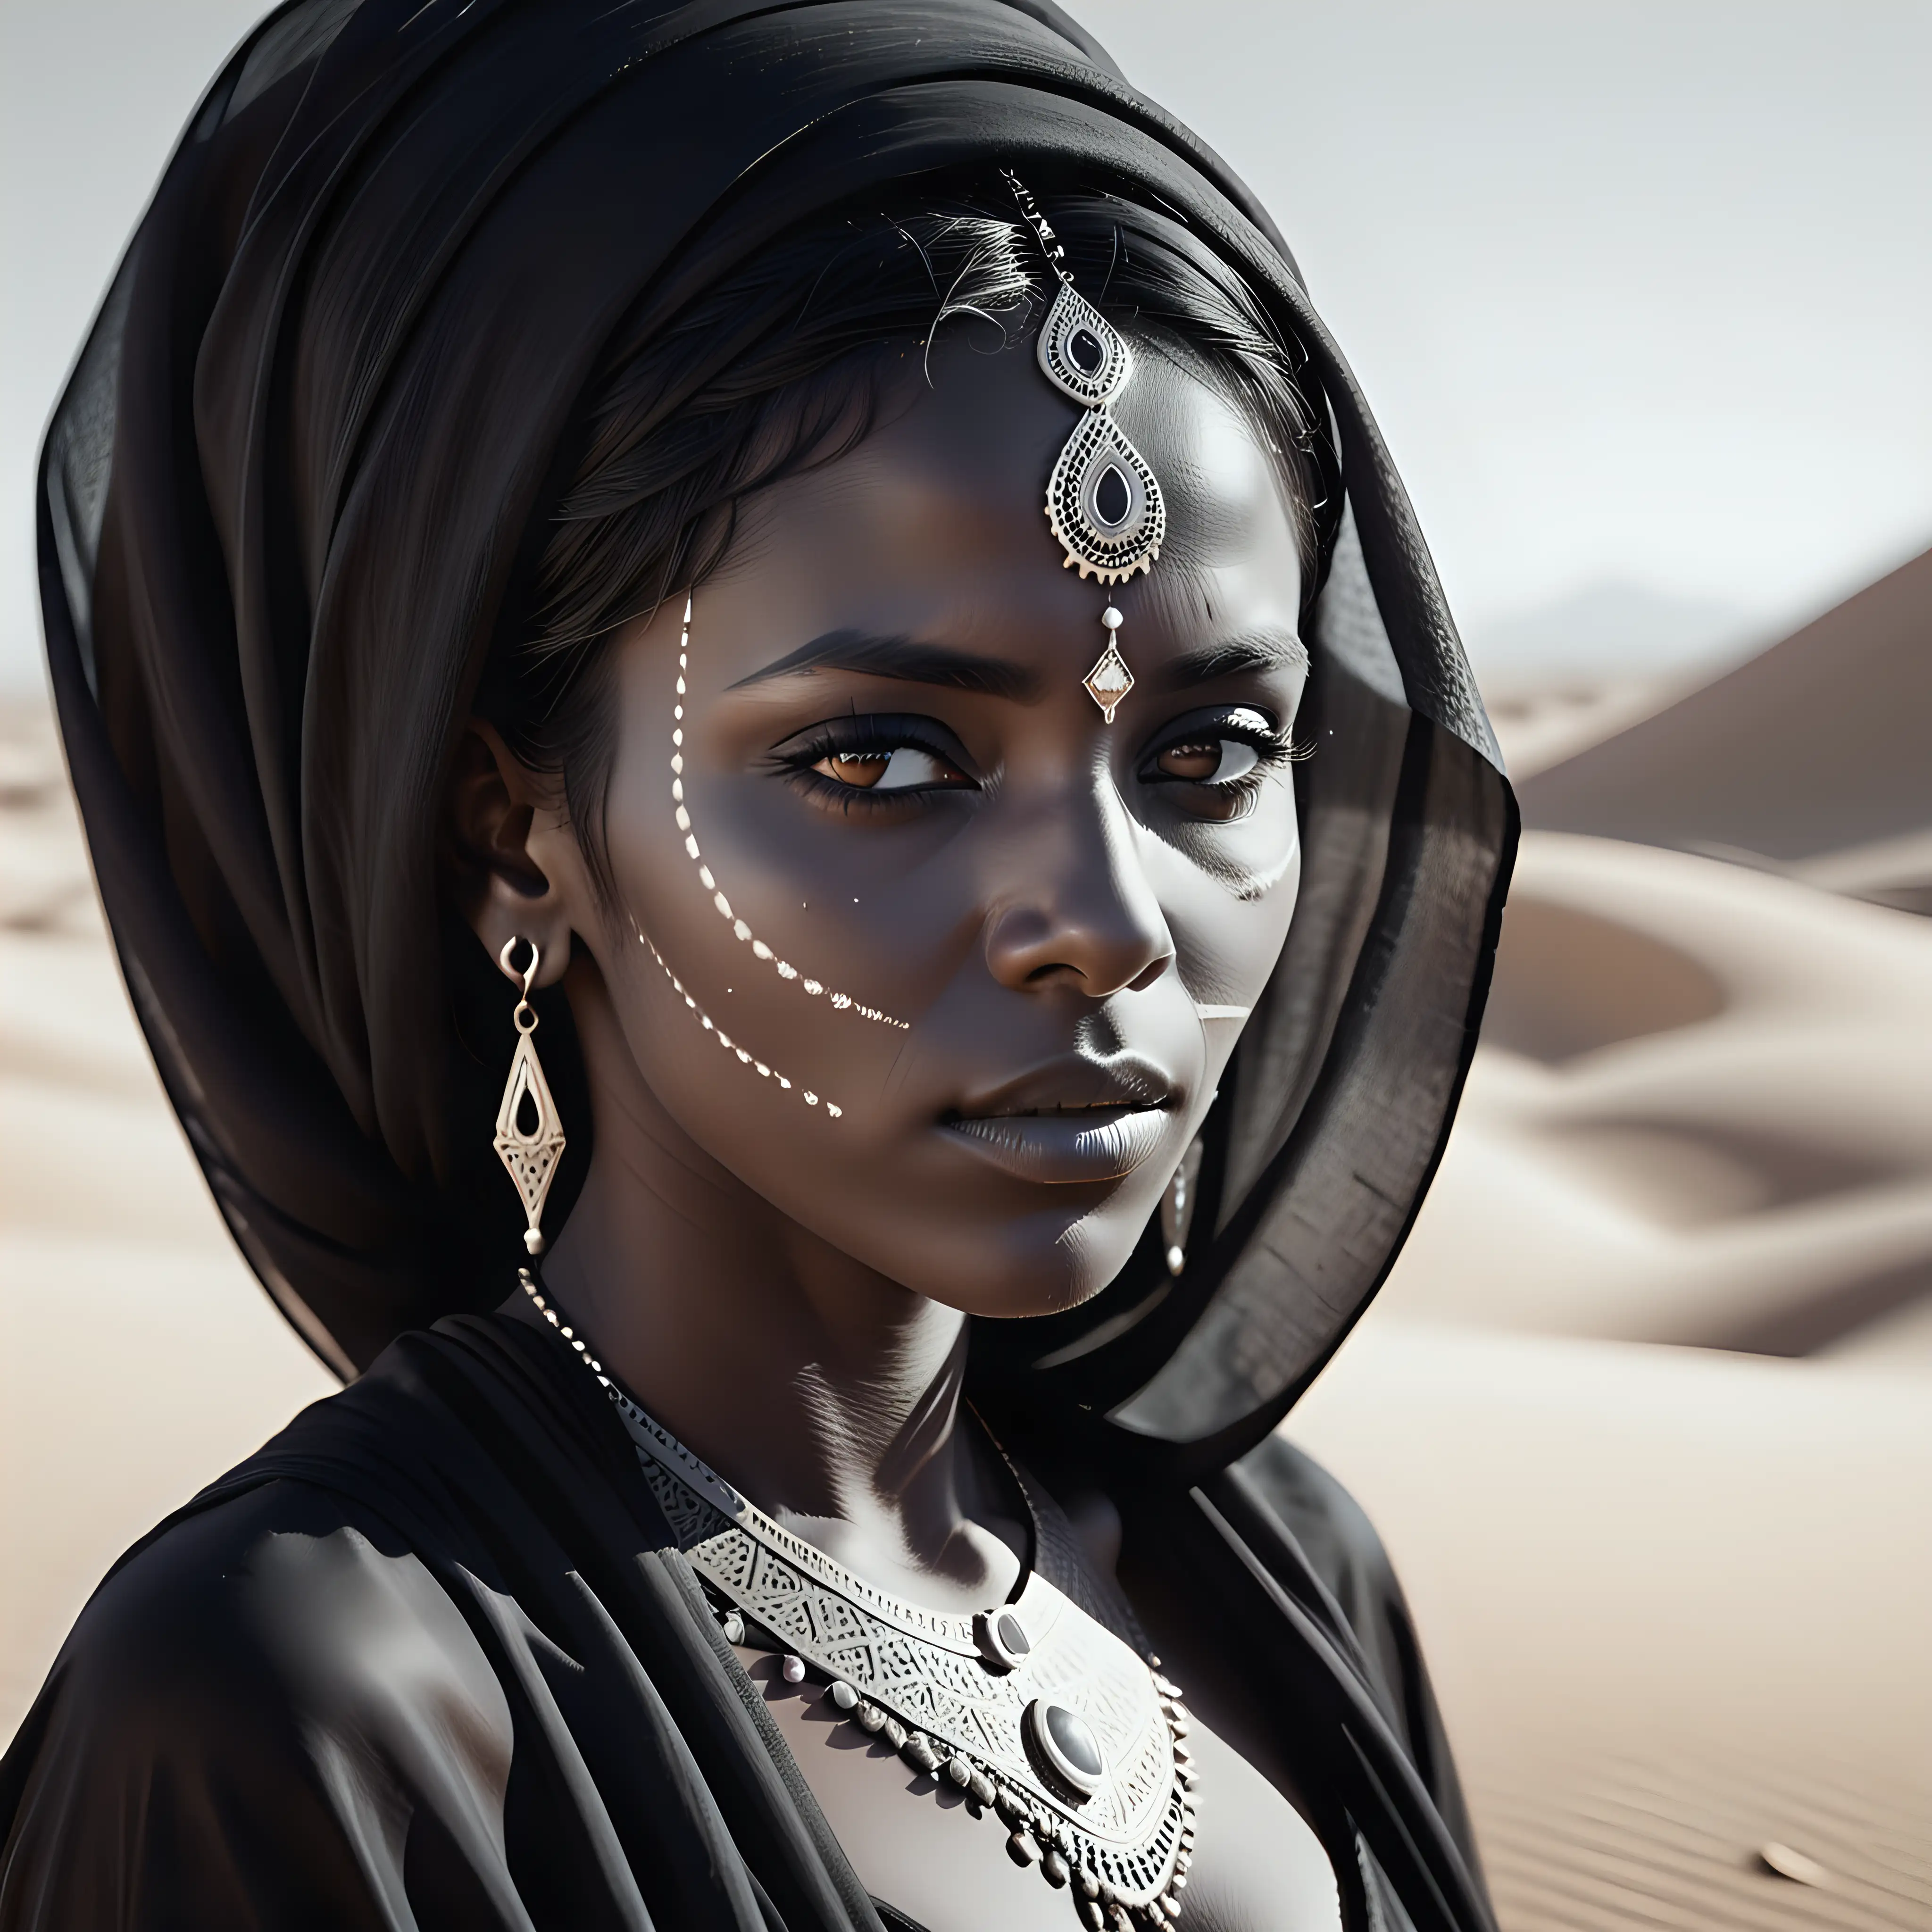 Bedouin Woman in a Desert Gothic Black and White Photography